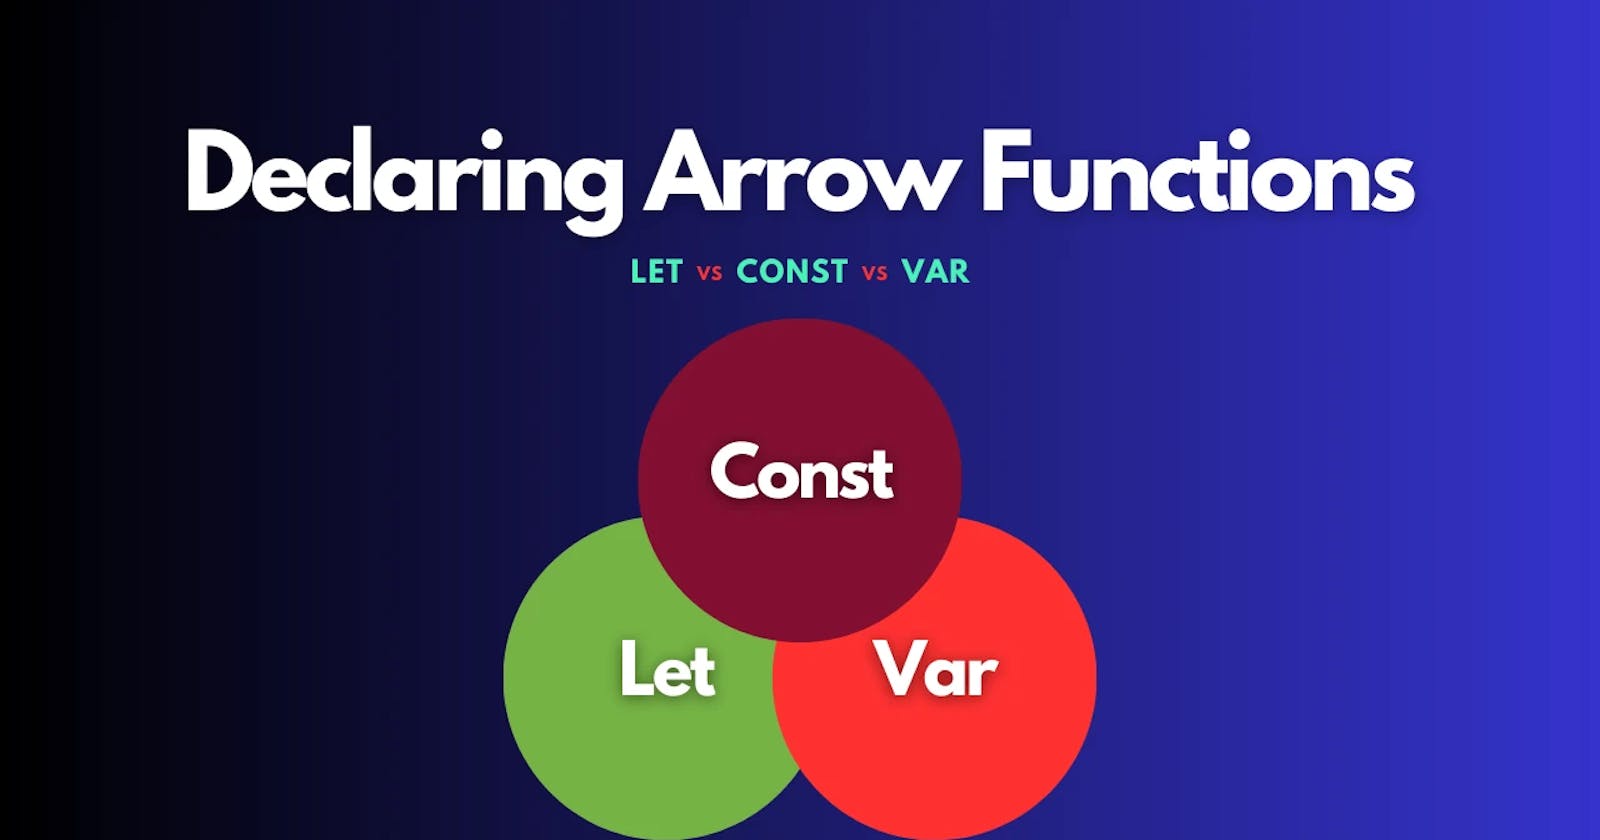 Why Do We Use Const to Declare Arrow Functions in JavaScript?